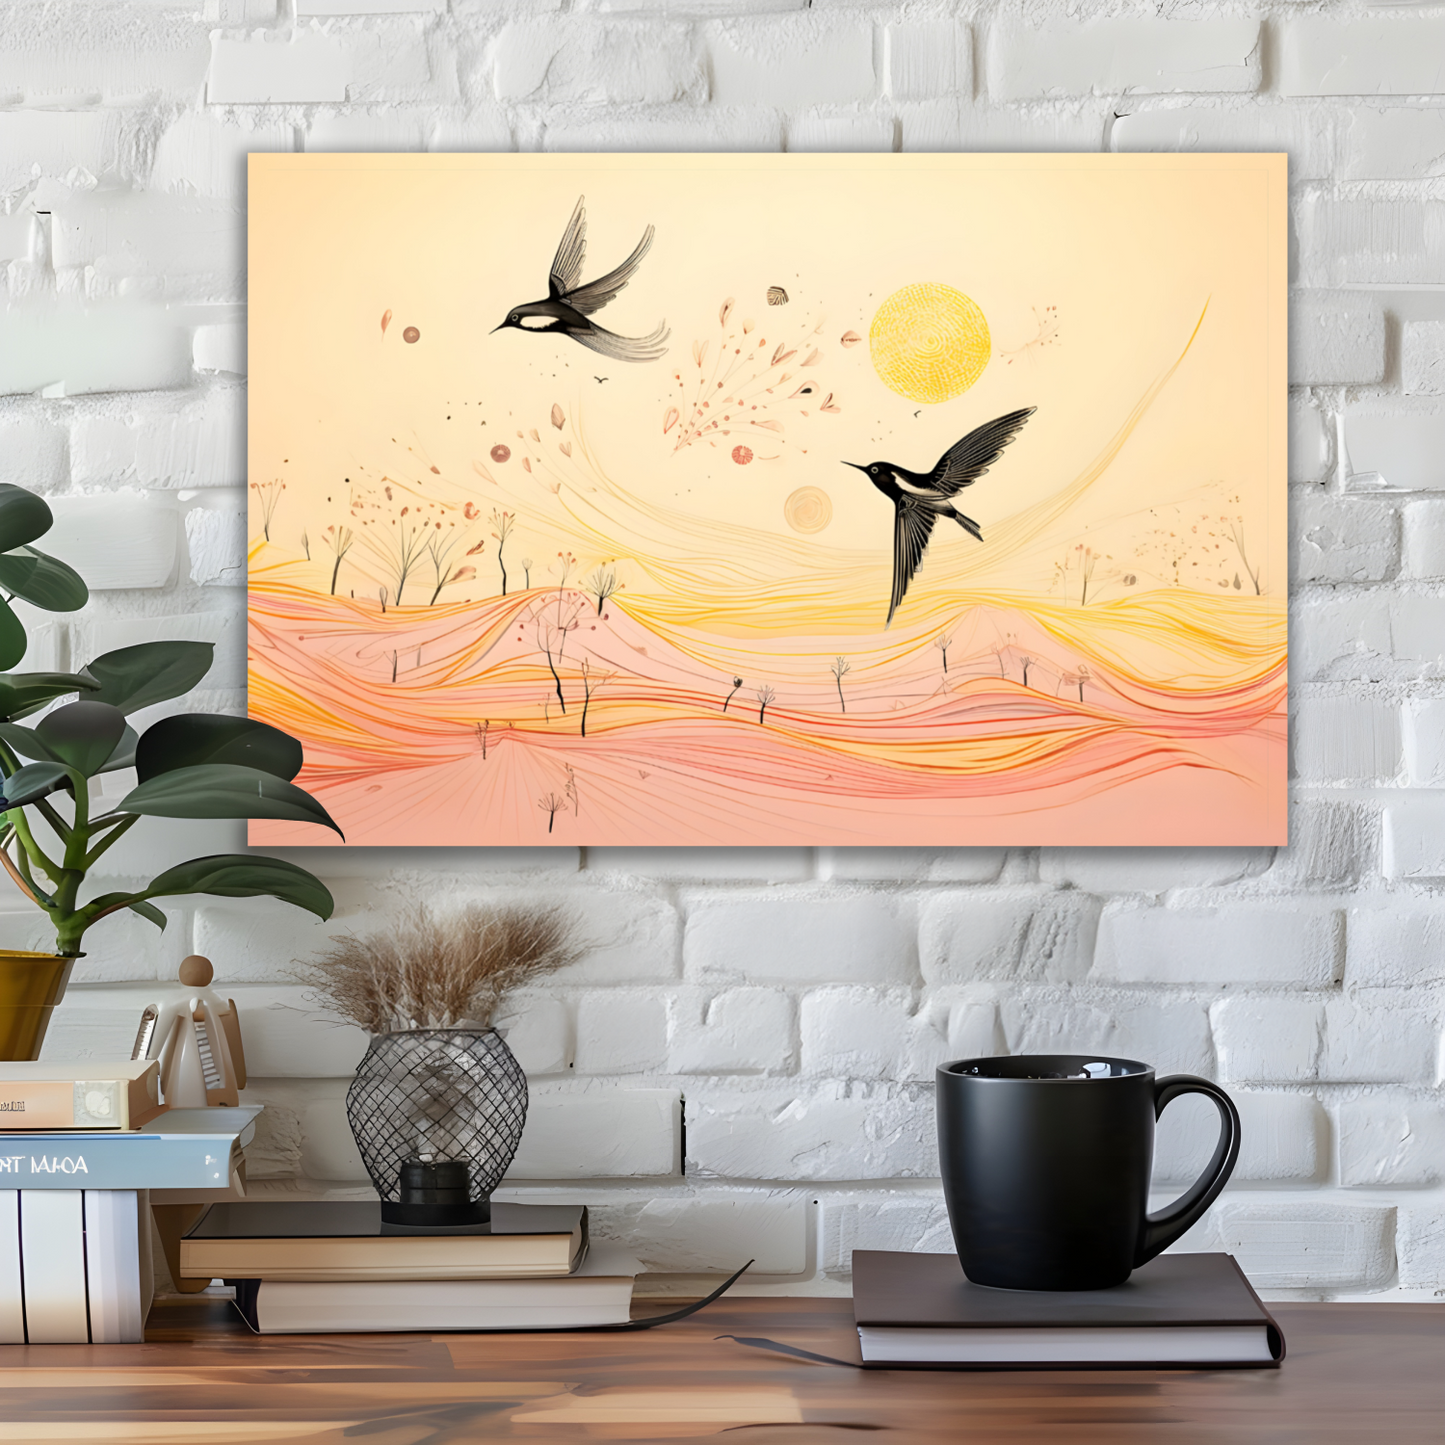 Harmony Of Swifts  Deluxe Box Landscape Canvas Prints